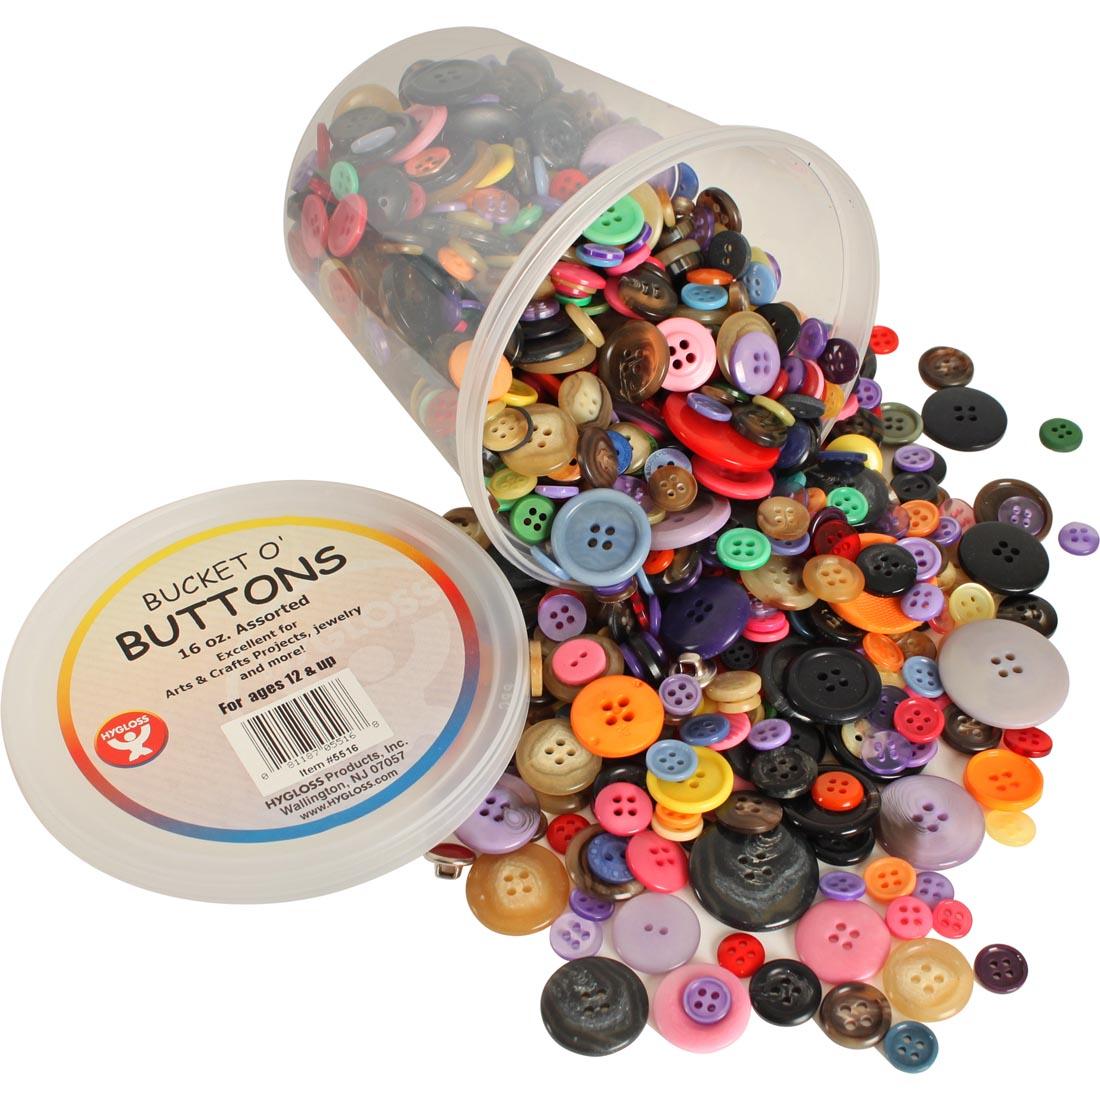 Bucket O' Buttons turned on its side and spilling out